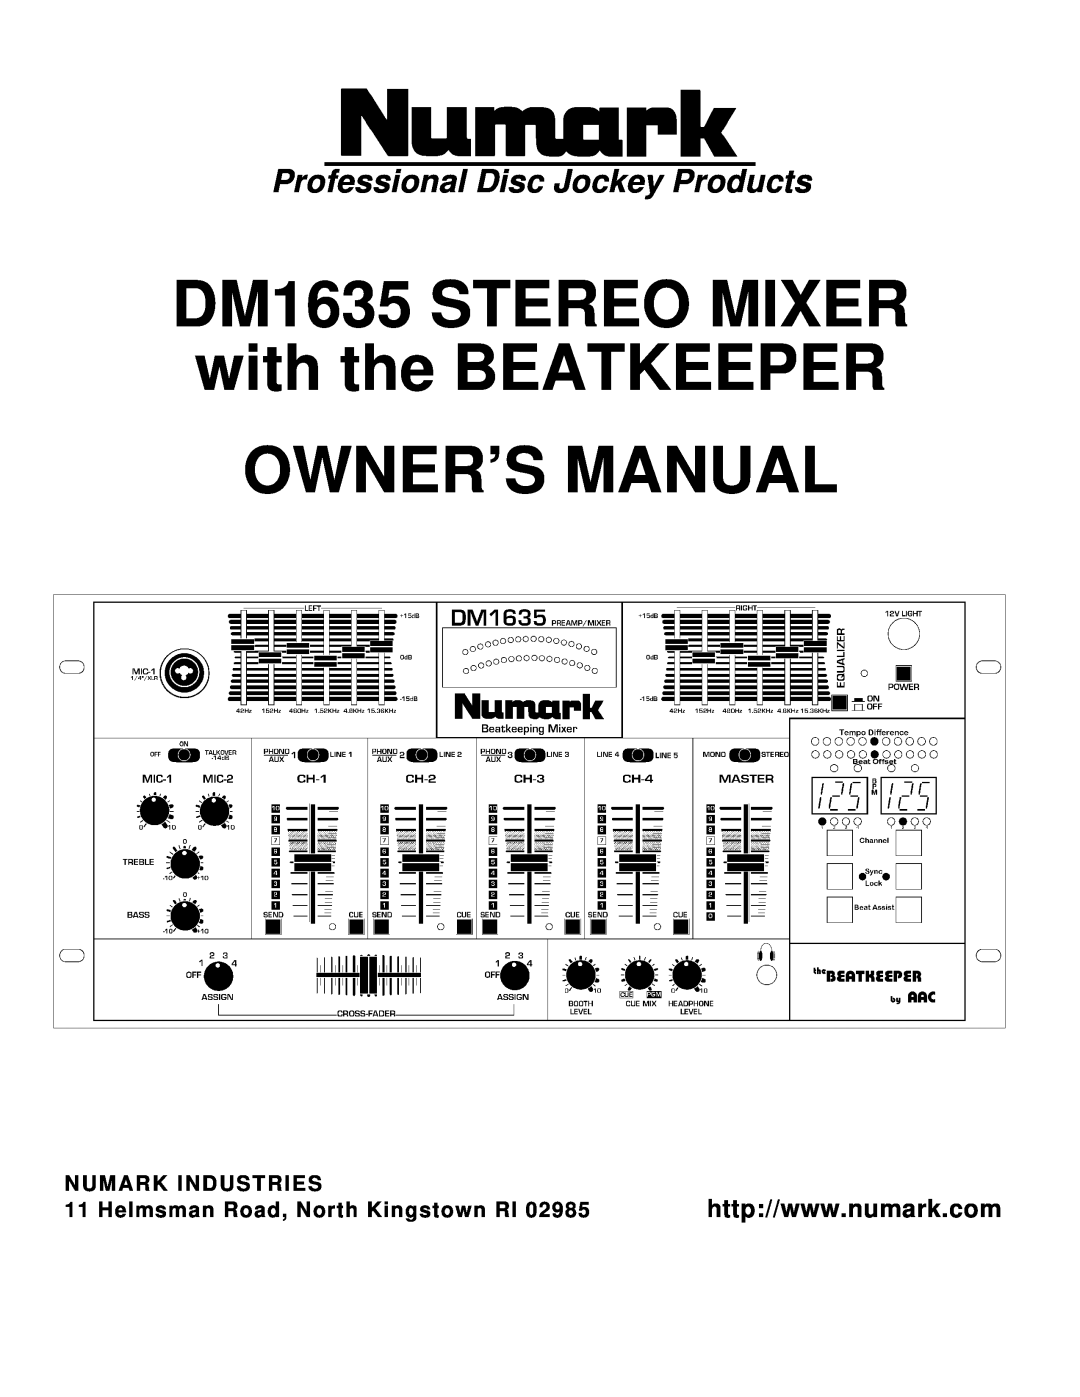 Numark Industries owner manual Professional Disc Jockey Products, DM1635 STEREO MIXER with the BEATKEEPER 